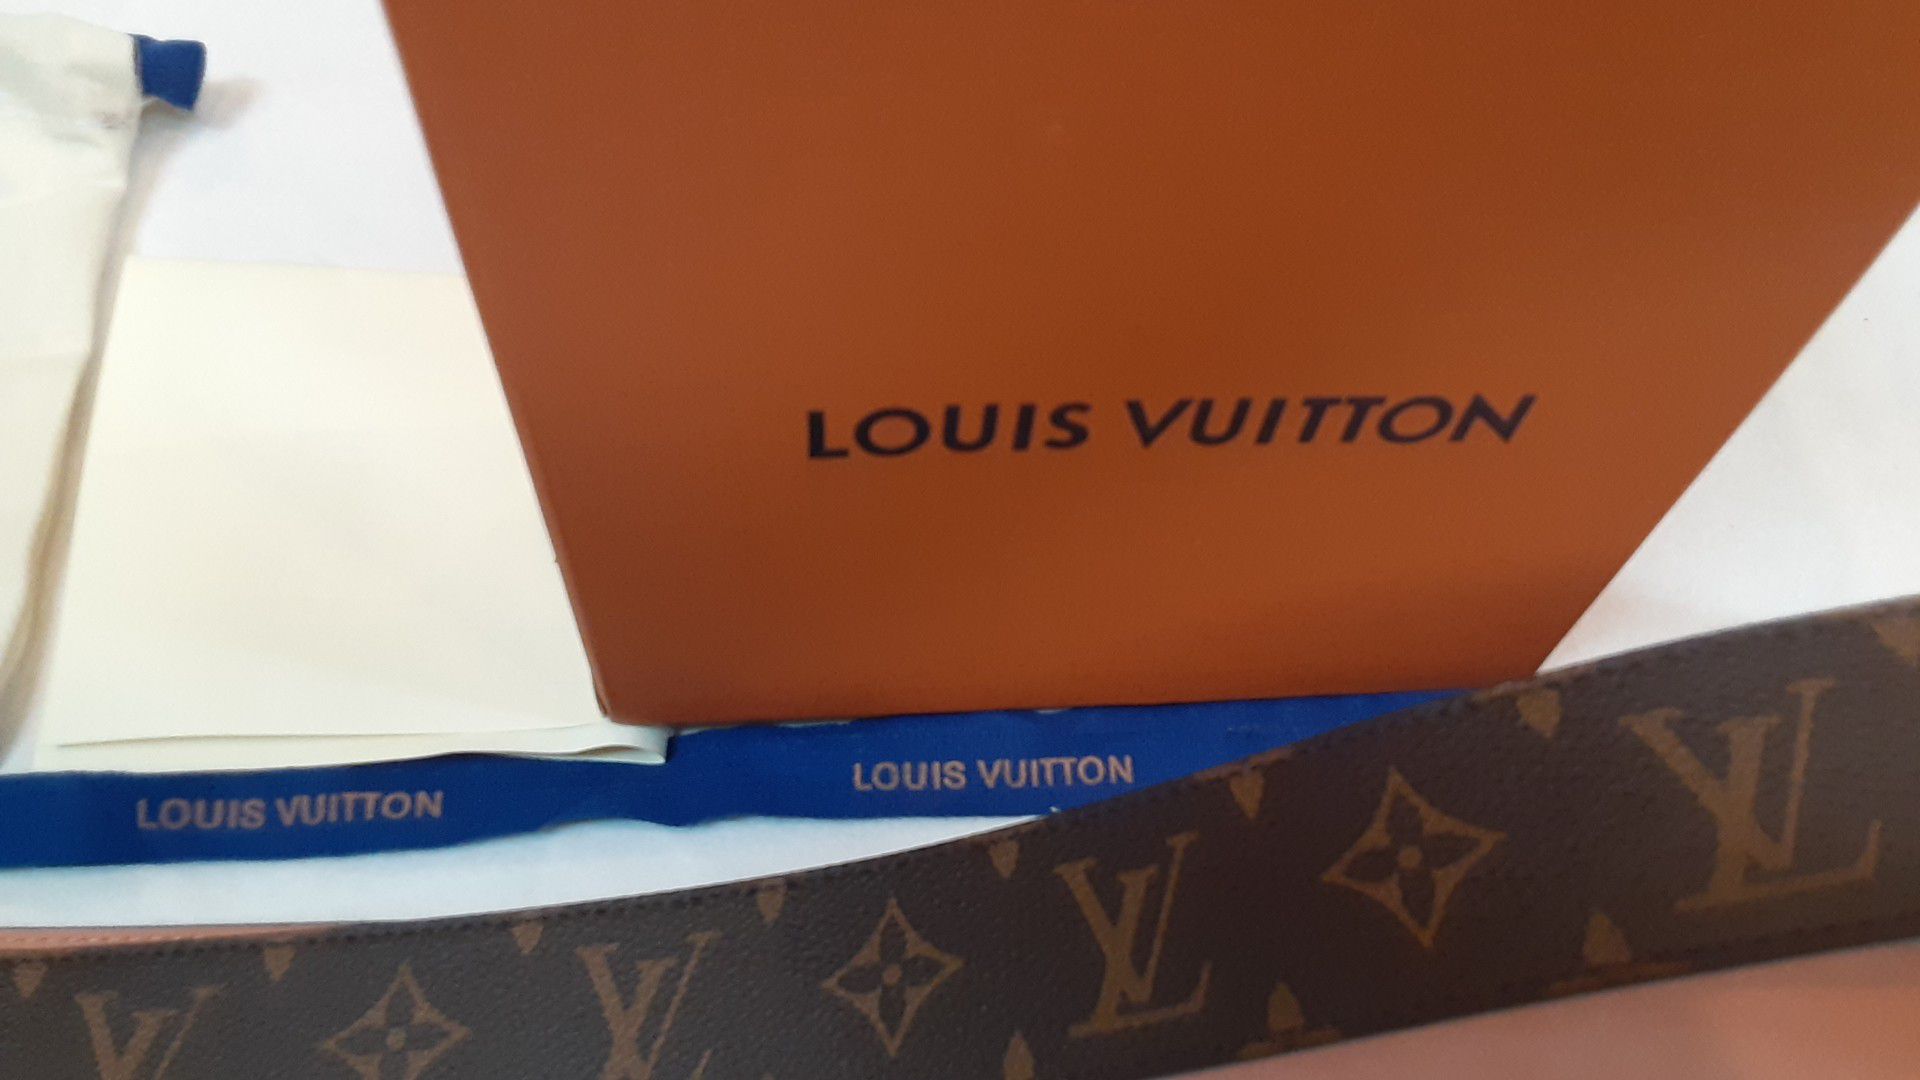 Authentic Louis Vuitton Brown / Black Reversible Monogram Leather Belt Size  90/36 Brand New With Tags for Sale in Garden City South, NY - OfferUp